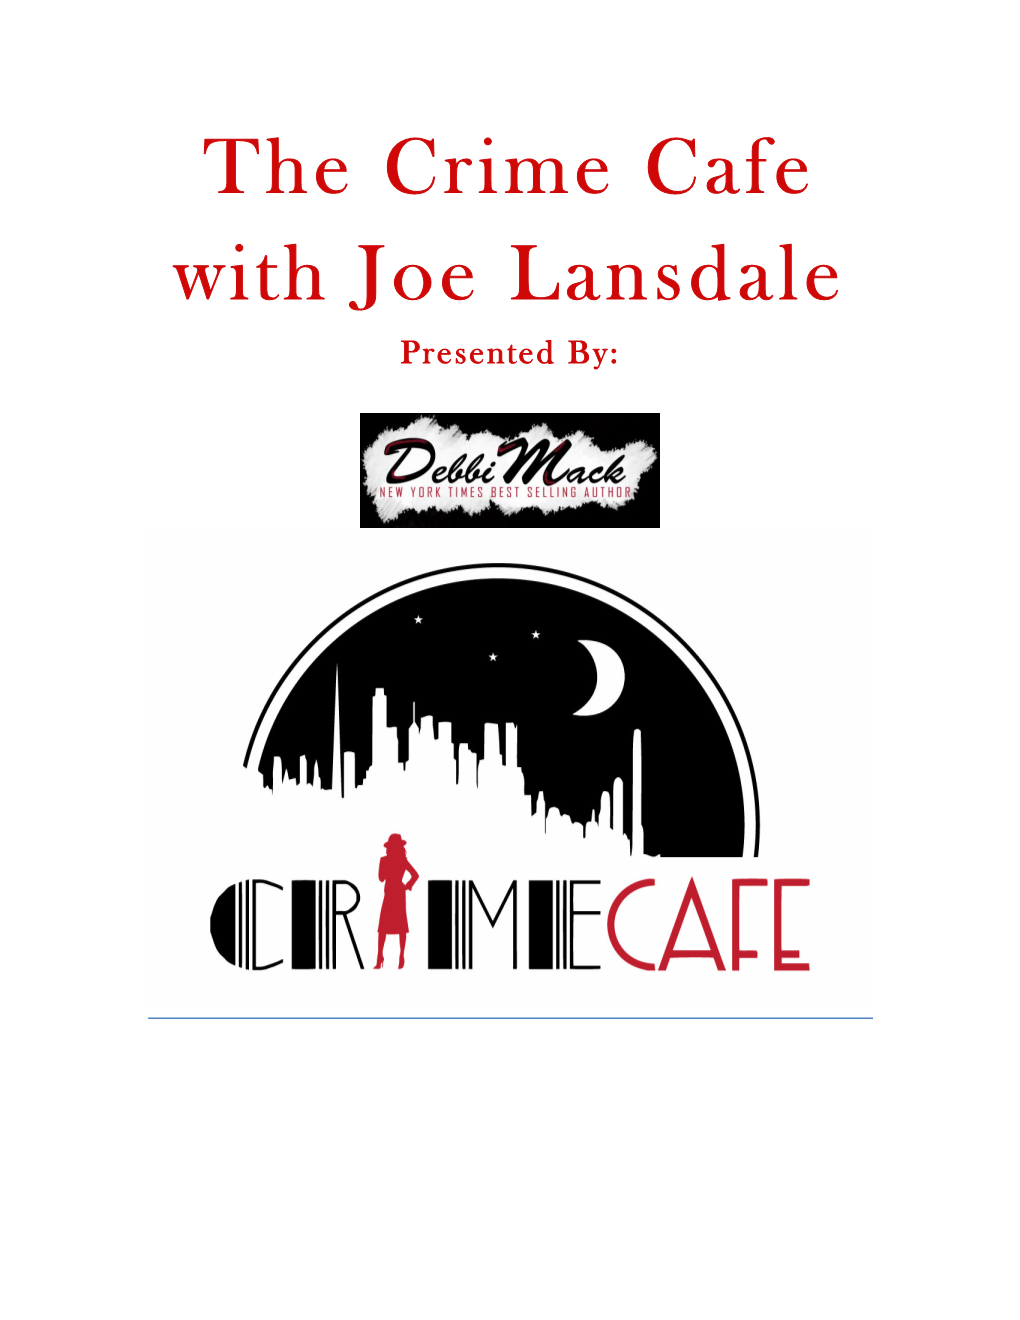 The Crime Cafe with Joe Lansdale Presented By